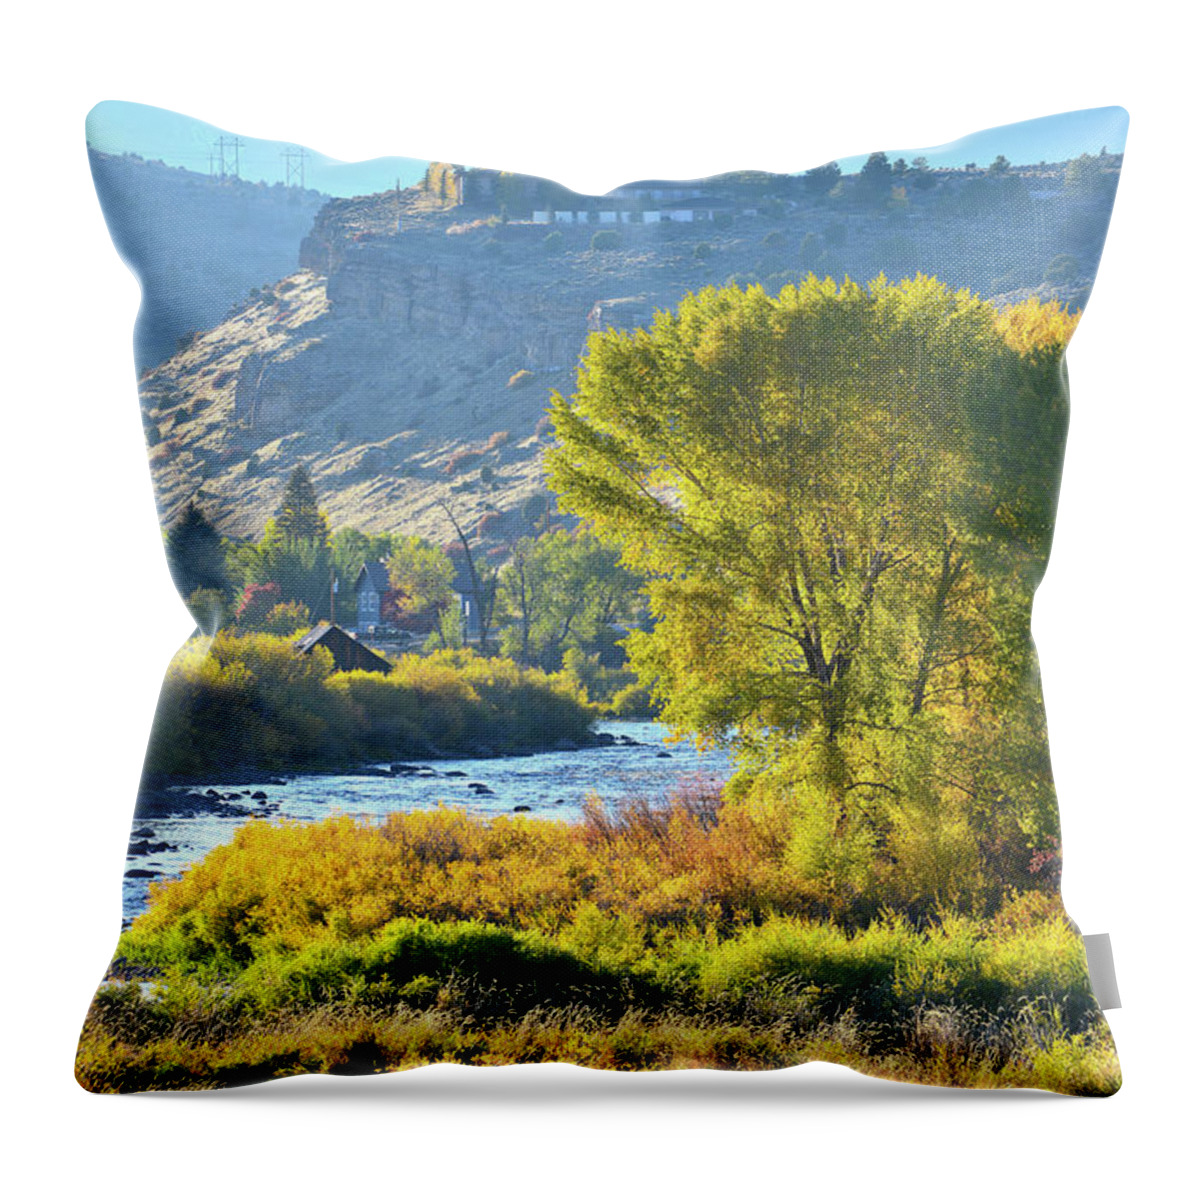 Colorado Throw Pillow featuring the photograph Eagle River Fall Colors by Ray Mathis